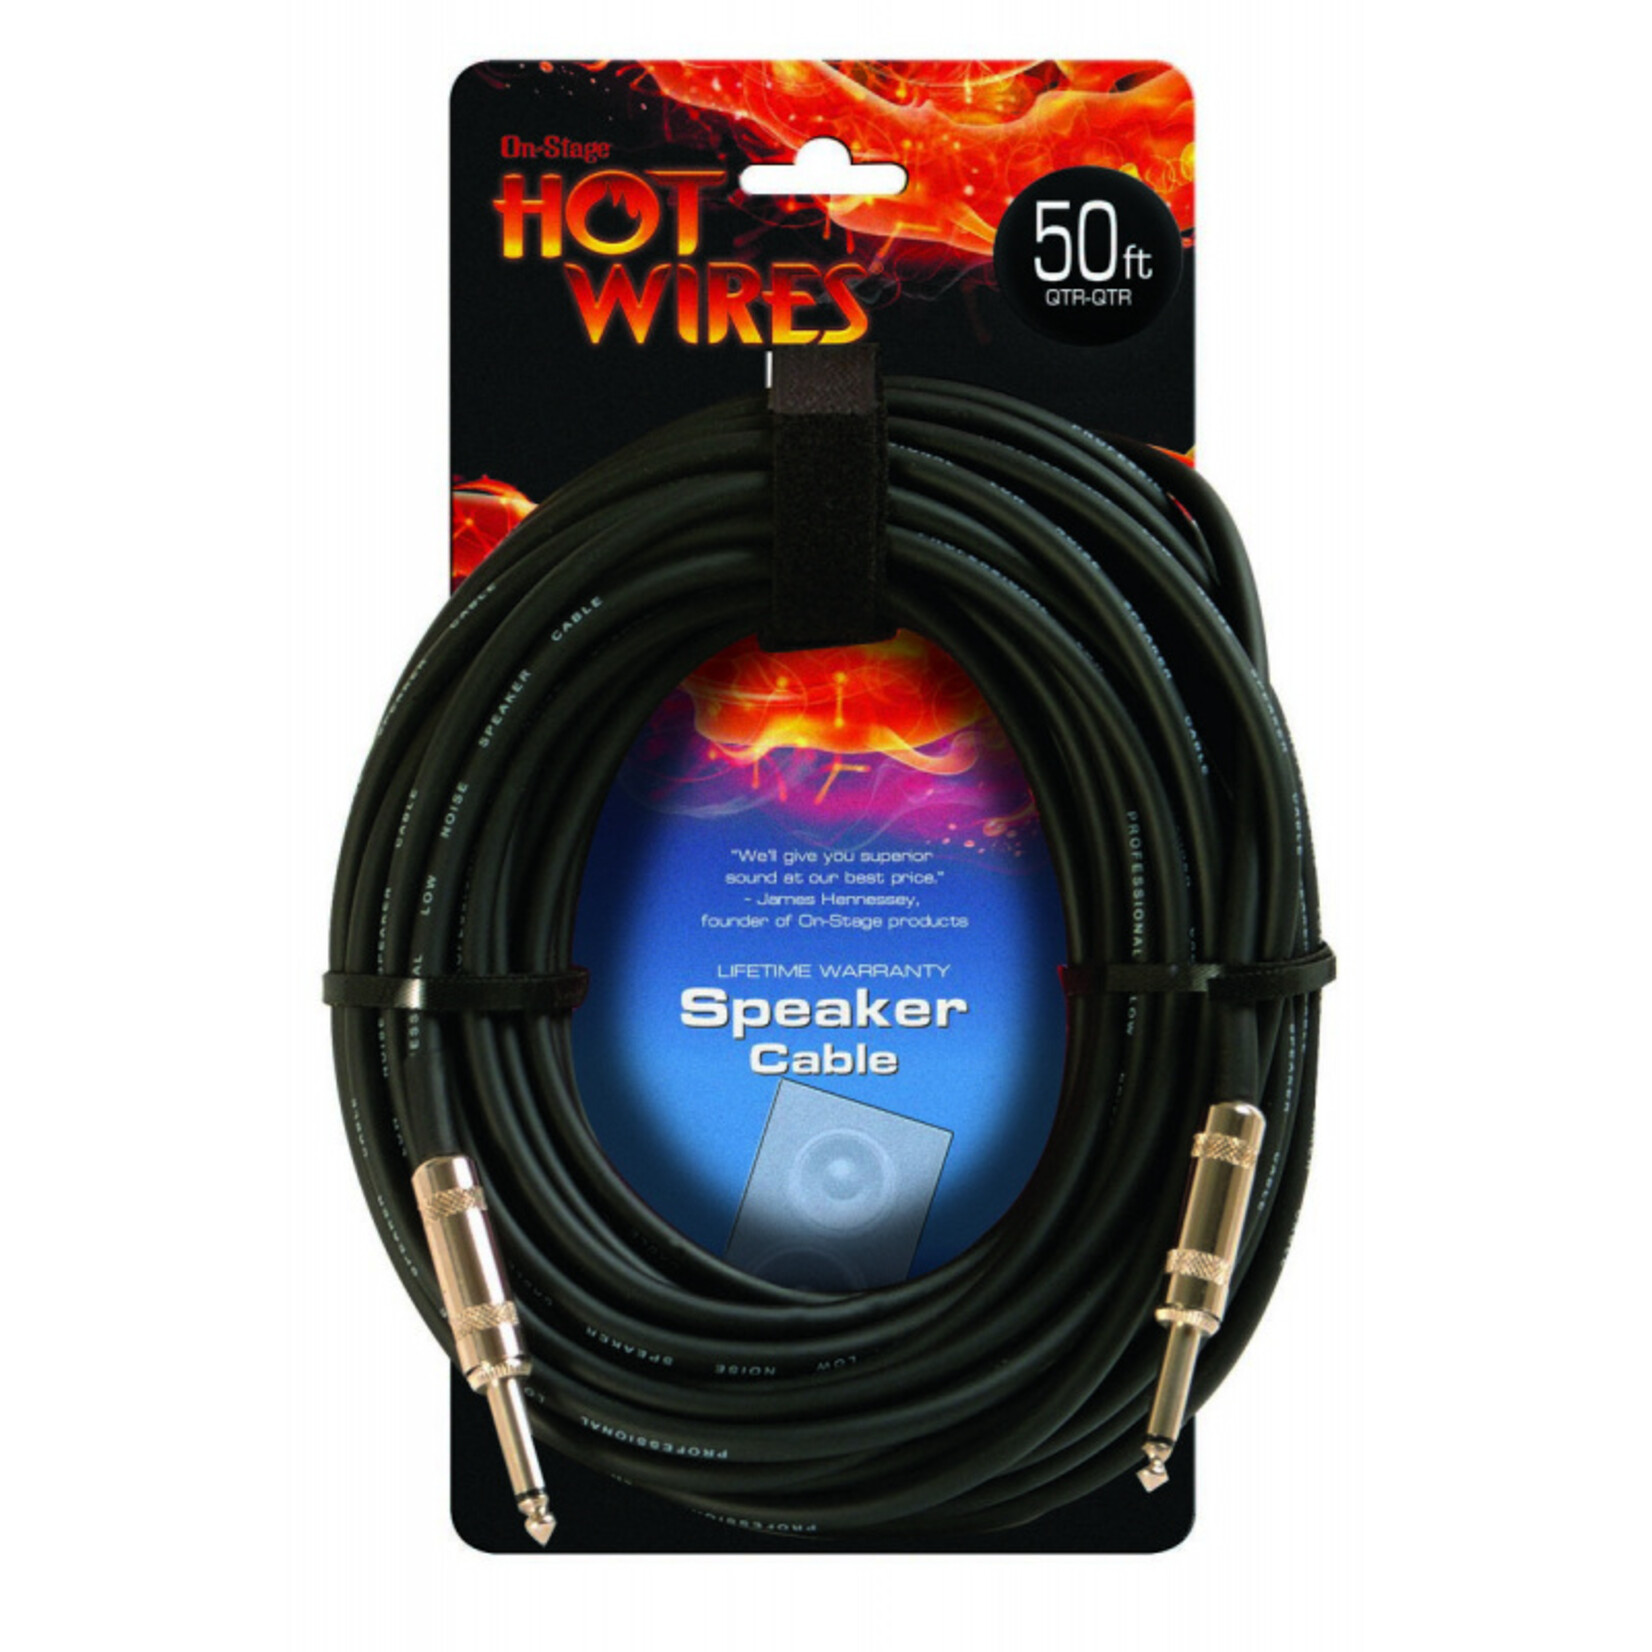 Hot Wires 50' Speaker Cable